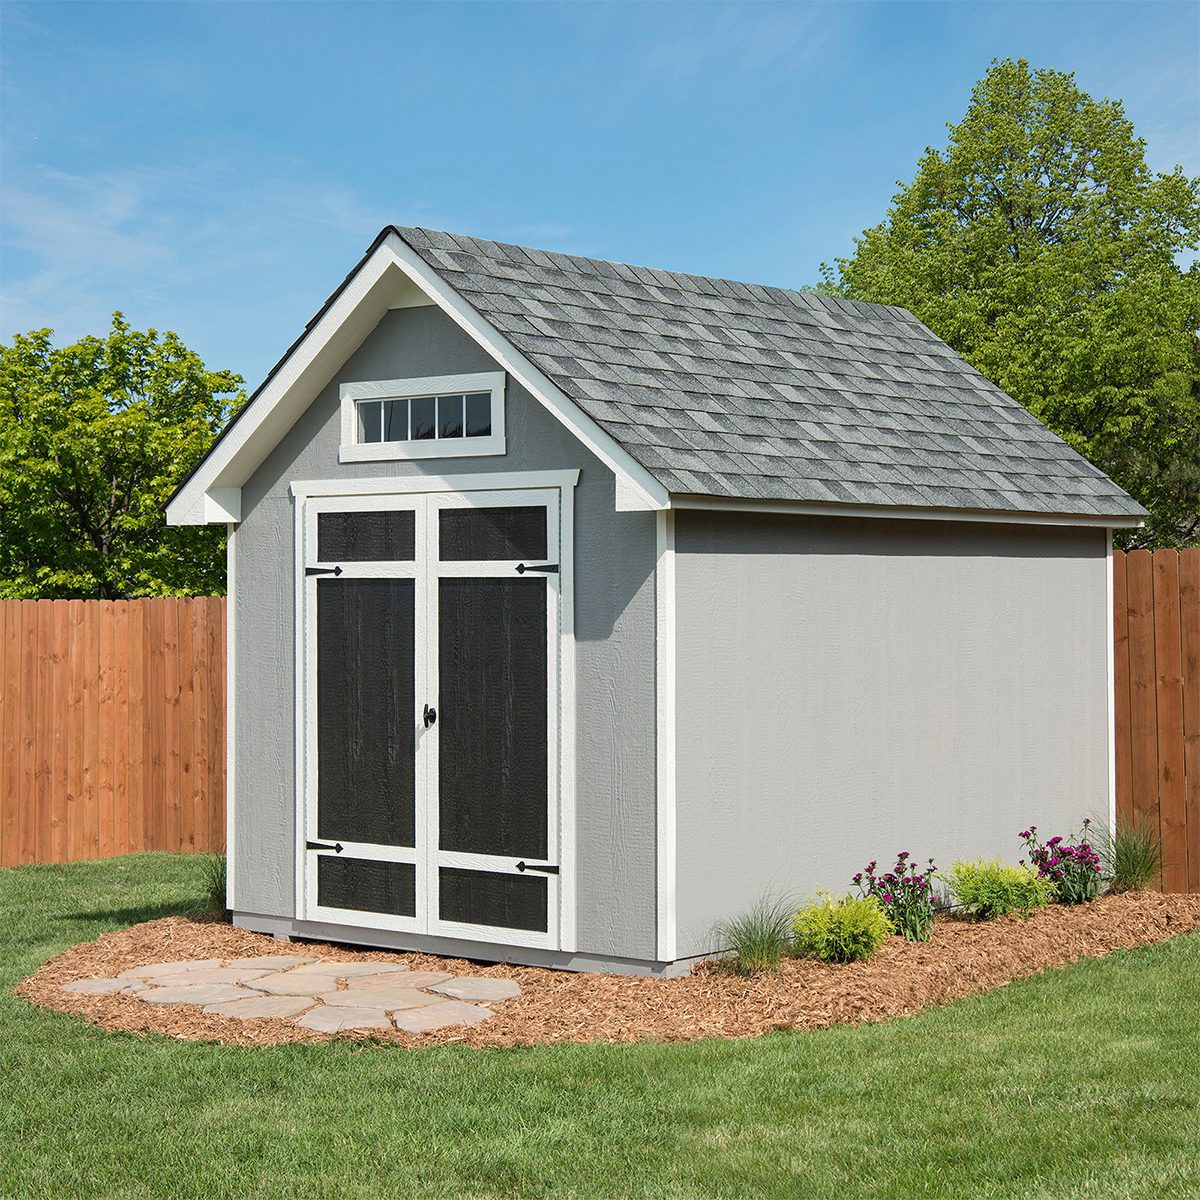 3-Shelby-8x12-Shed-BG2